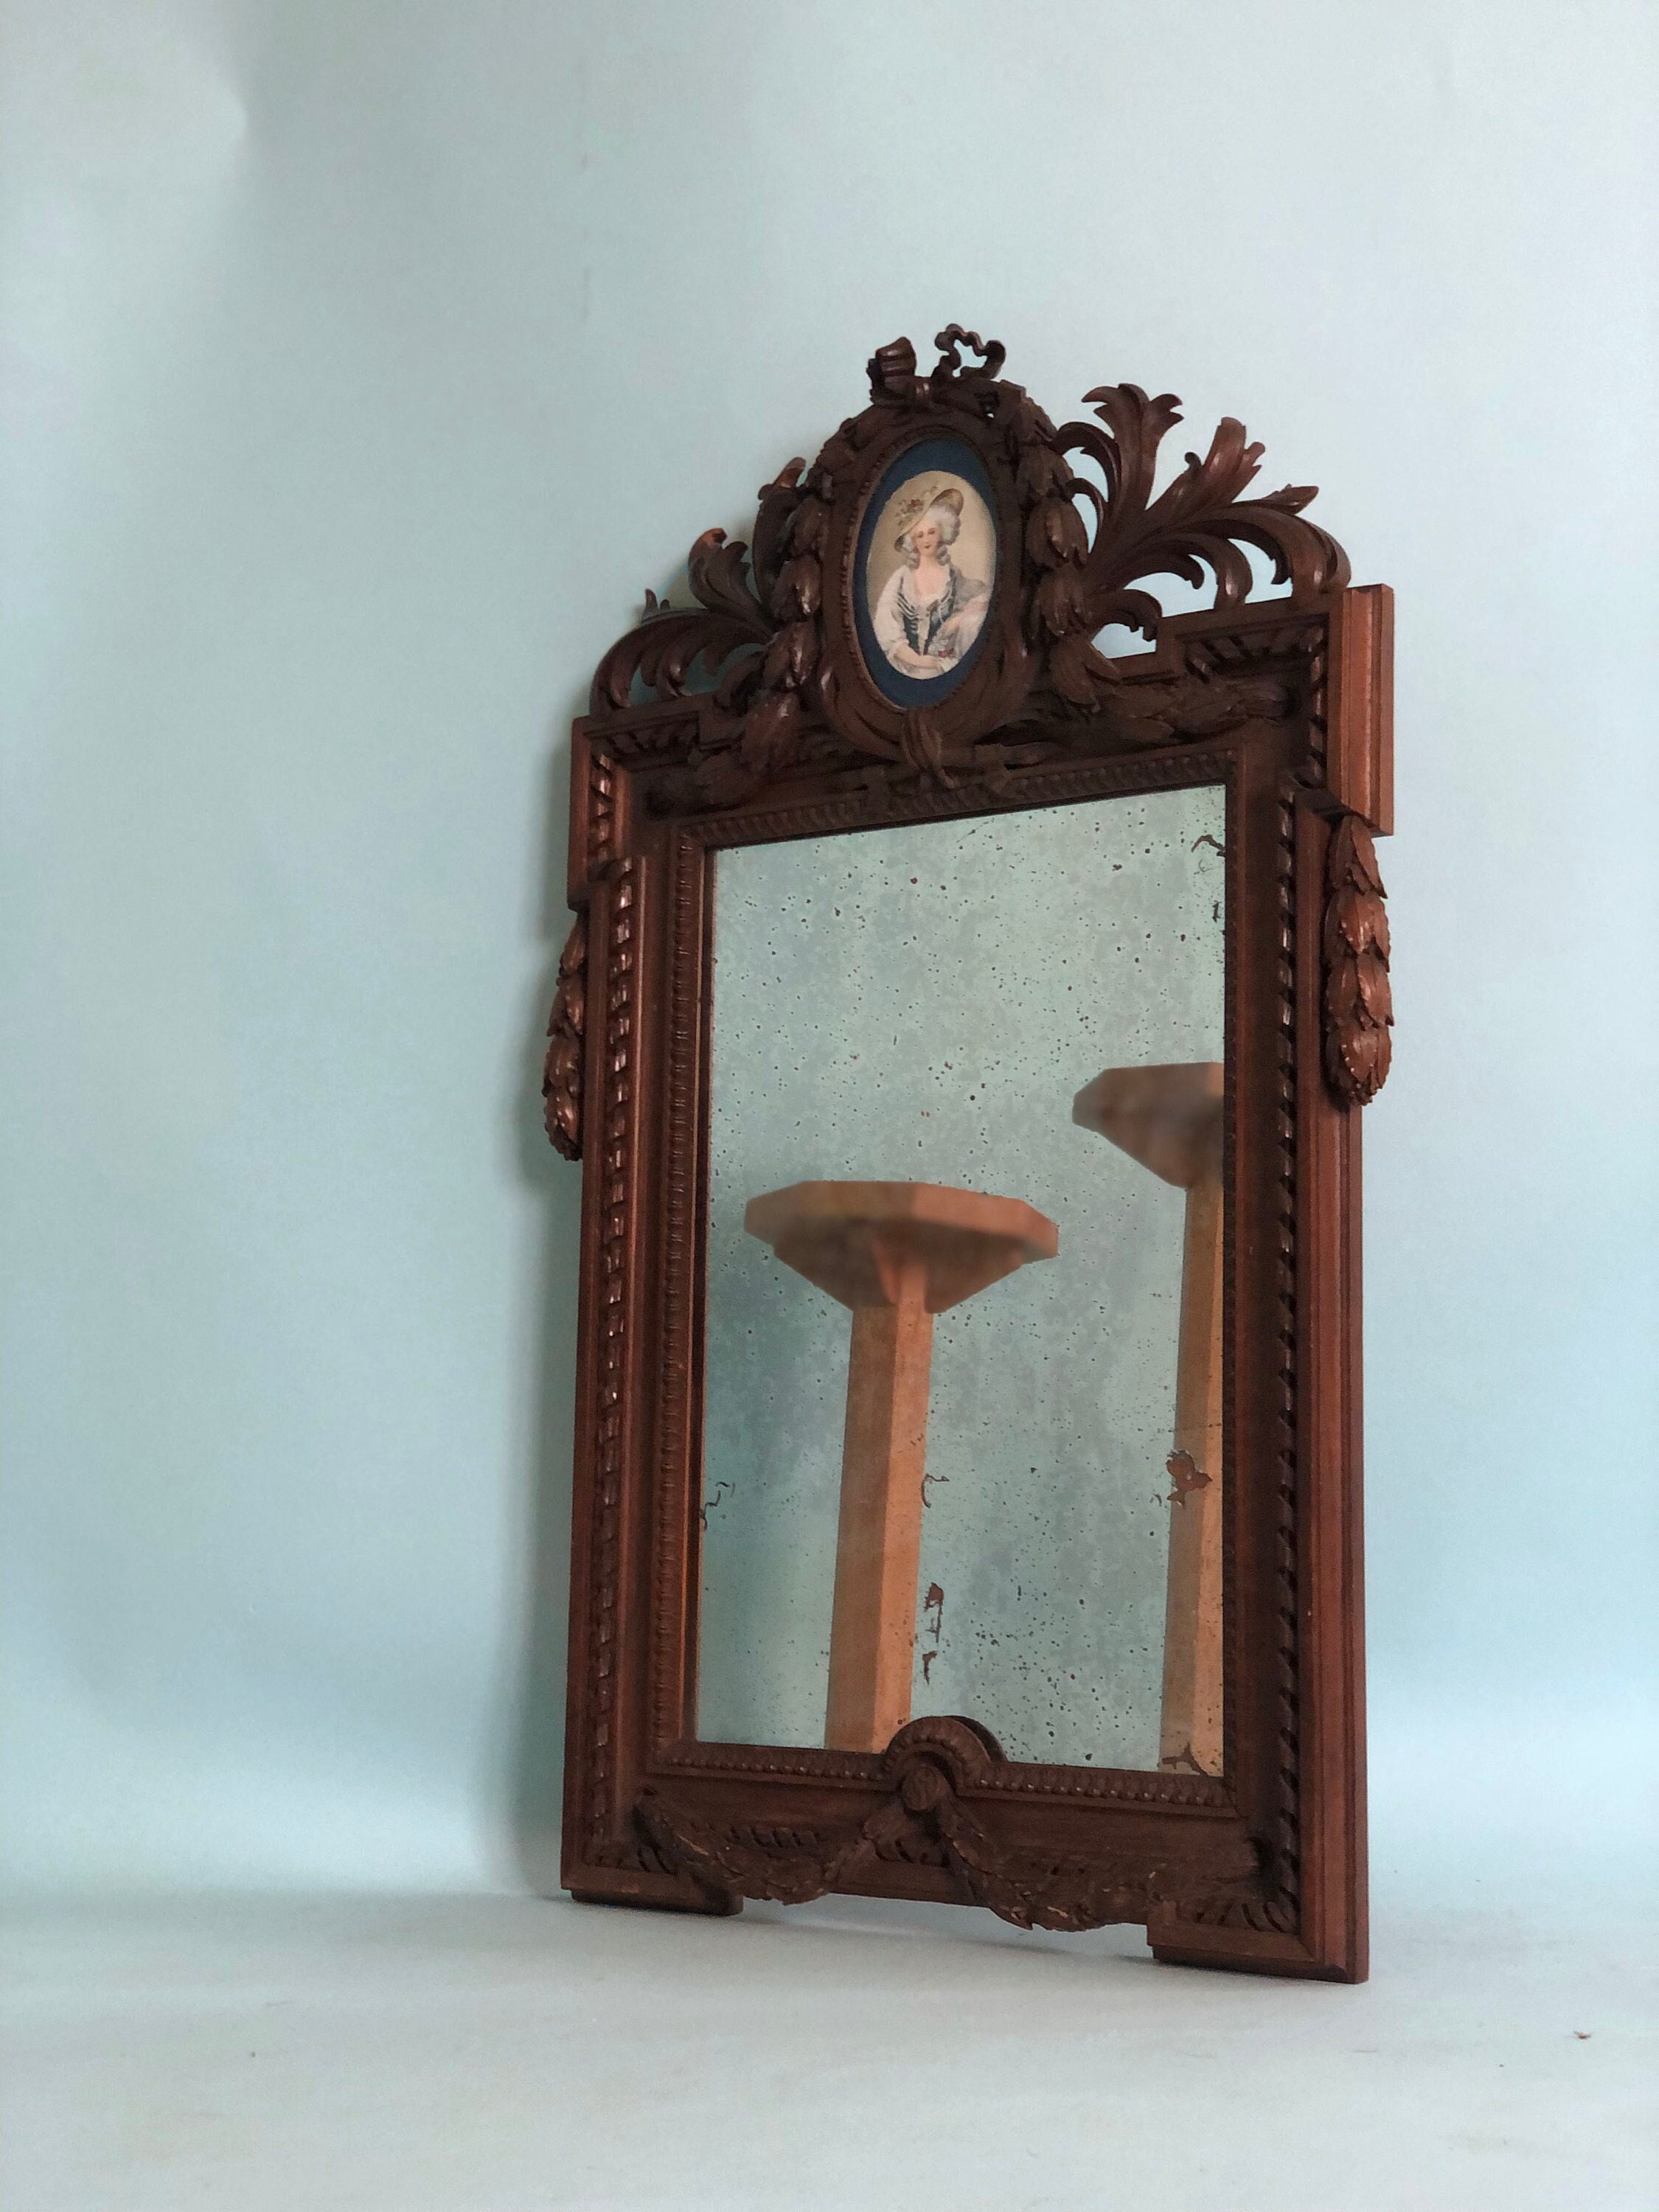 EGHOME Antiqued Gold Ornate Mirror … curated on LTK